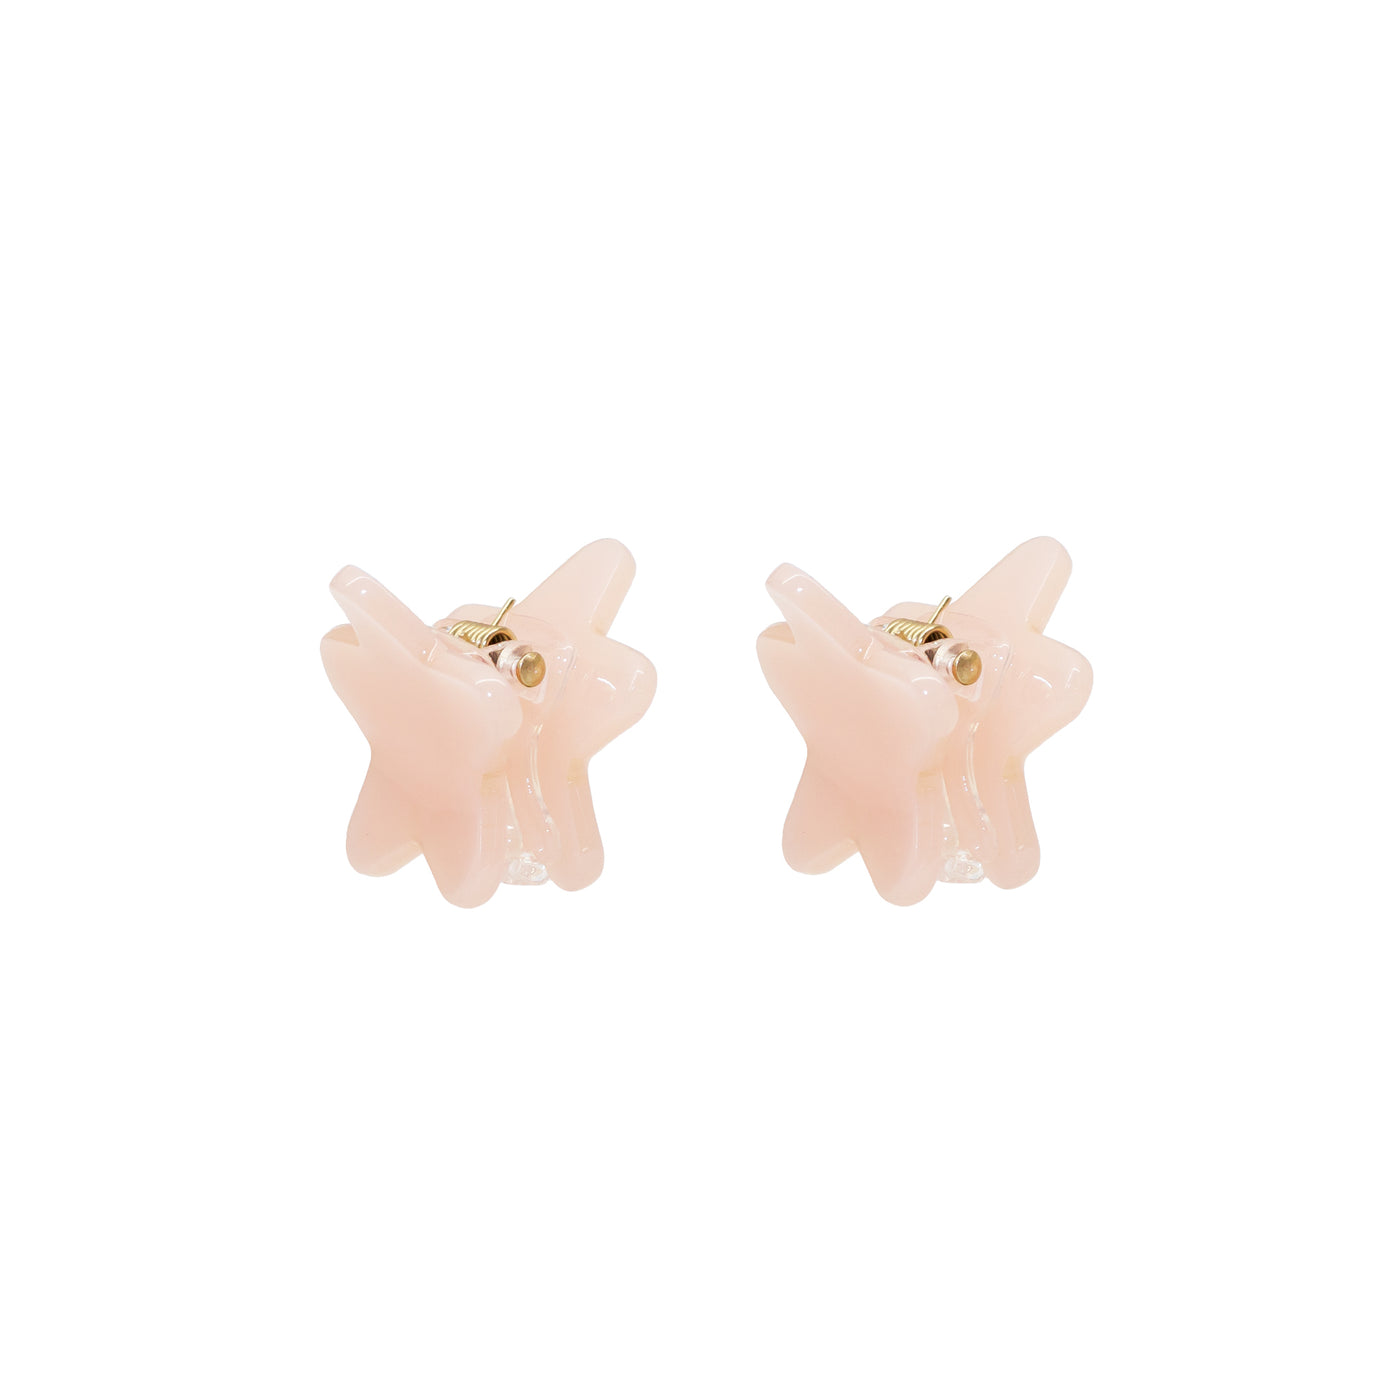 Baby Star Clip Set in Blush angled view